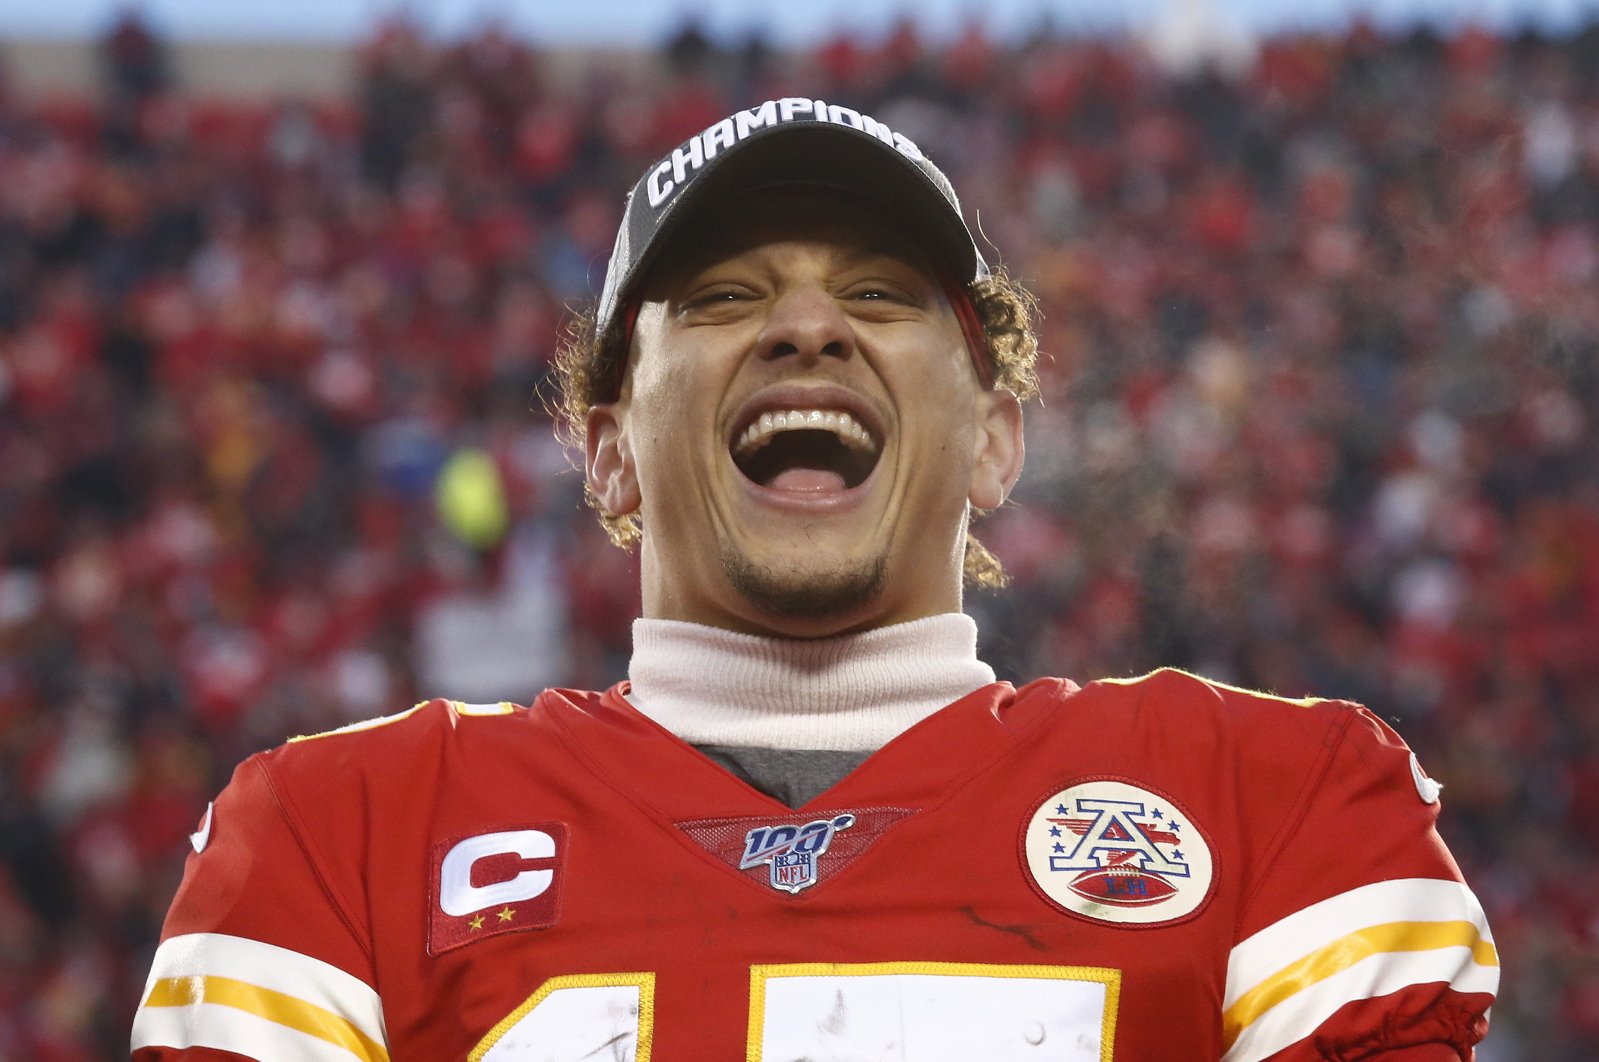 Kansas City Chiefs quarterback Patrick Mahomes laughs on stage after beating the Tennessee Titans in their AFC Championship game in Kansas City, Missouri, U.S., Jan. 19, 2020. (EPA Photo)